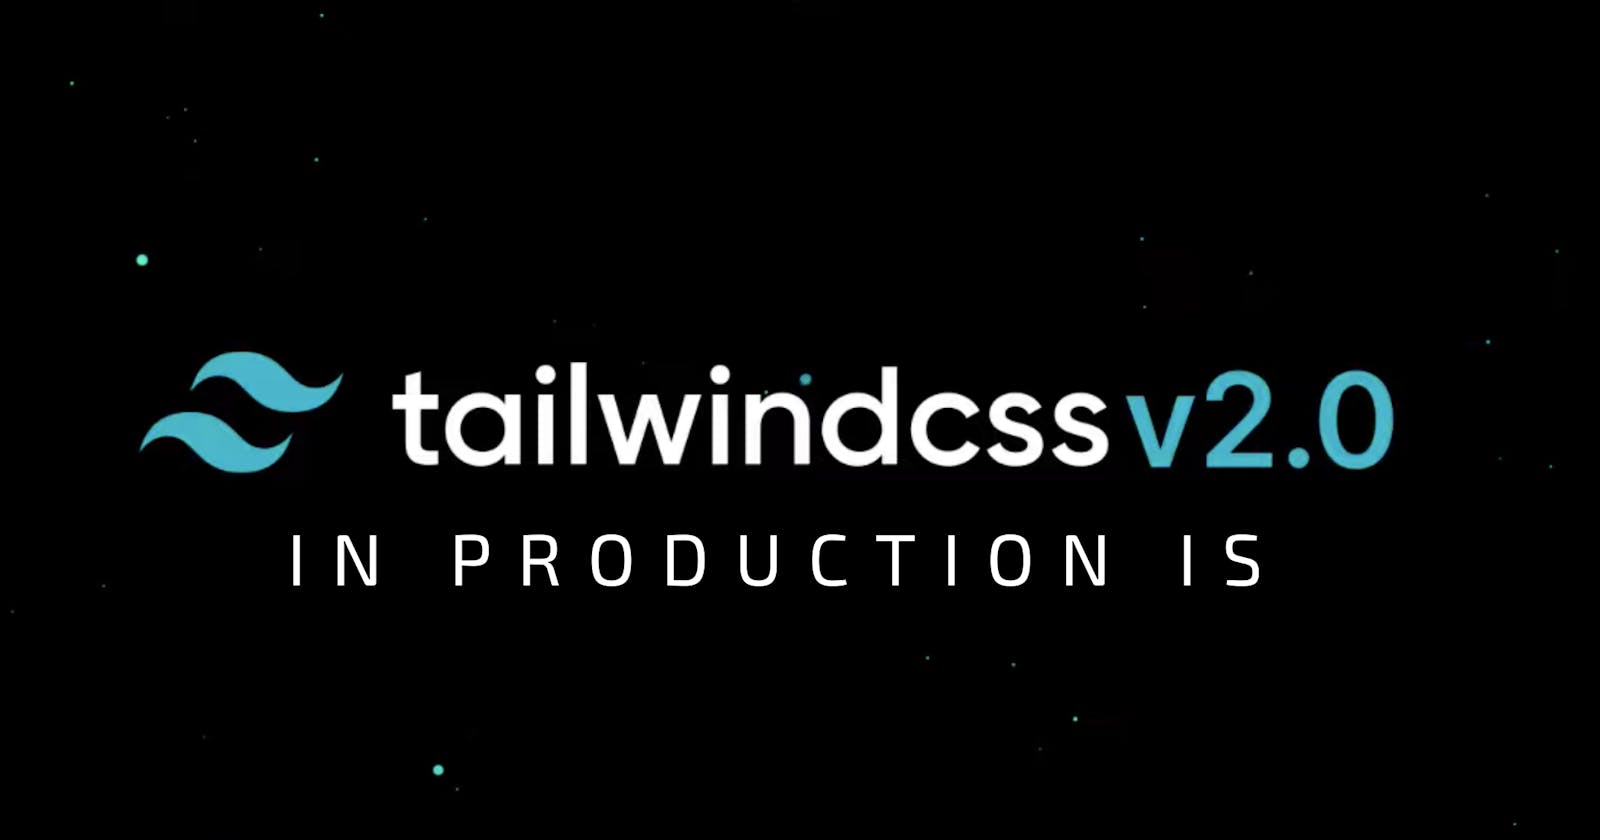 Tailwindcss v2.0 on production is 🔥